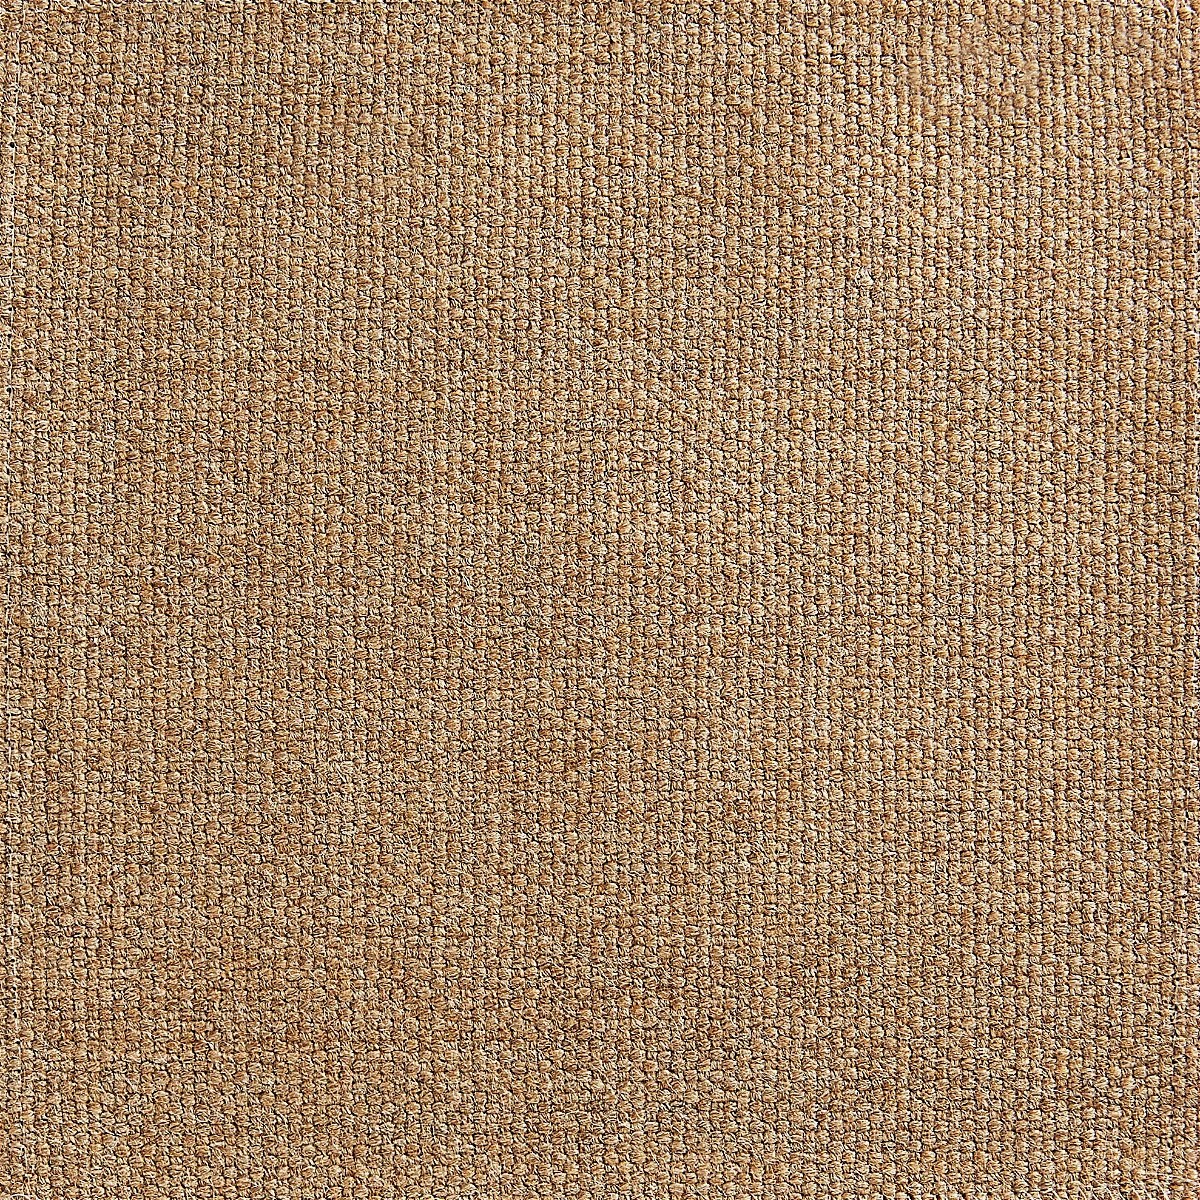 The image of an Atticus Wool Fabric product